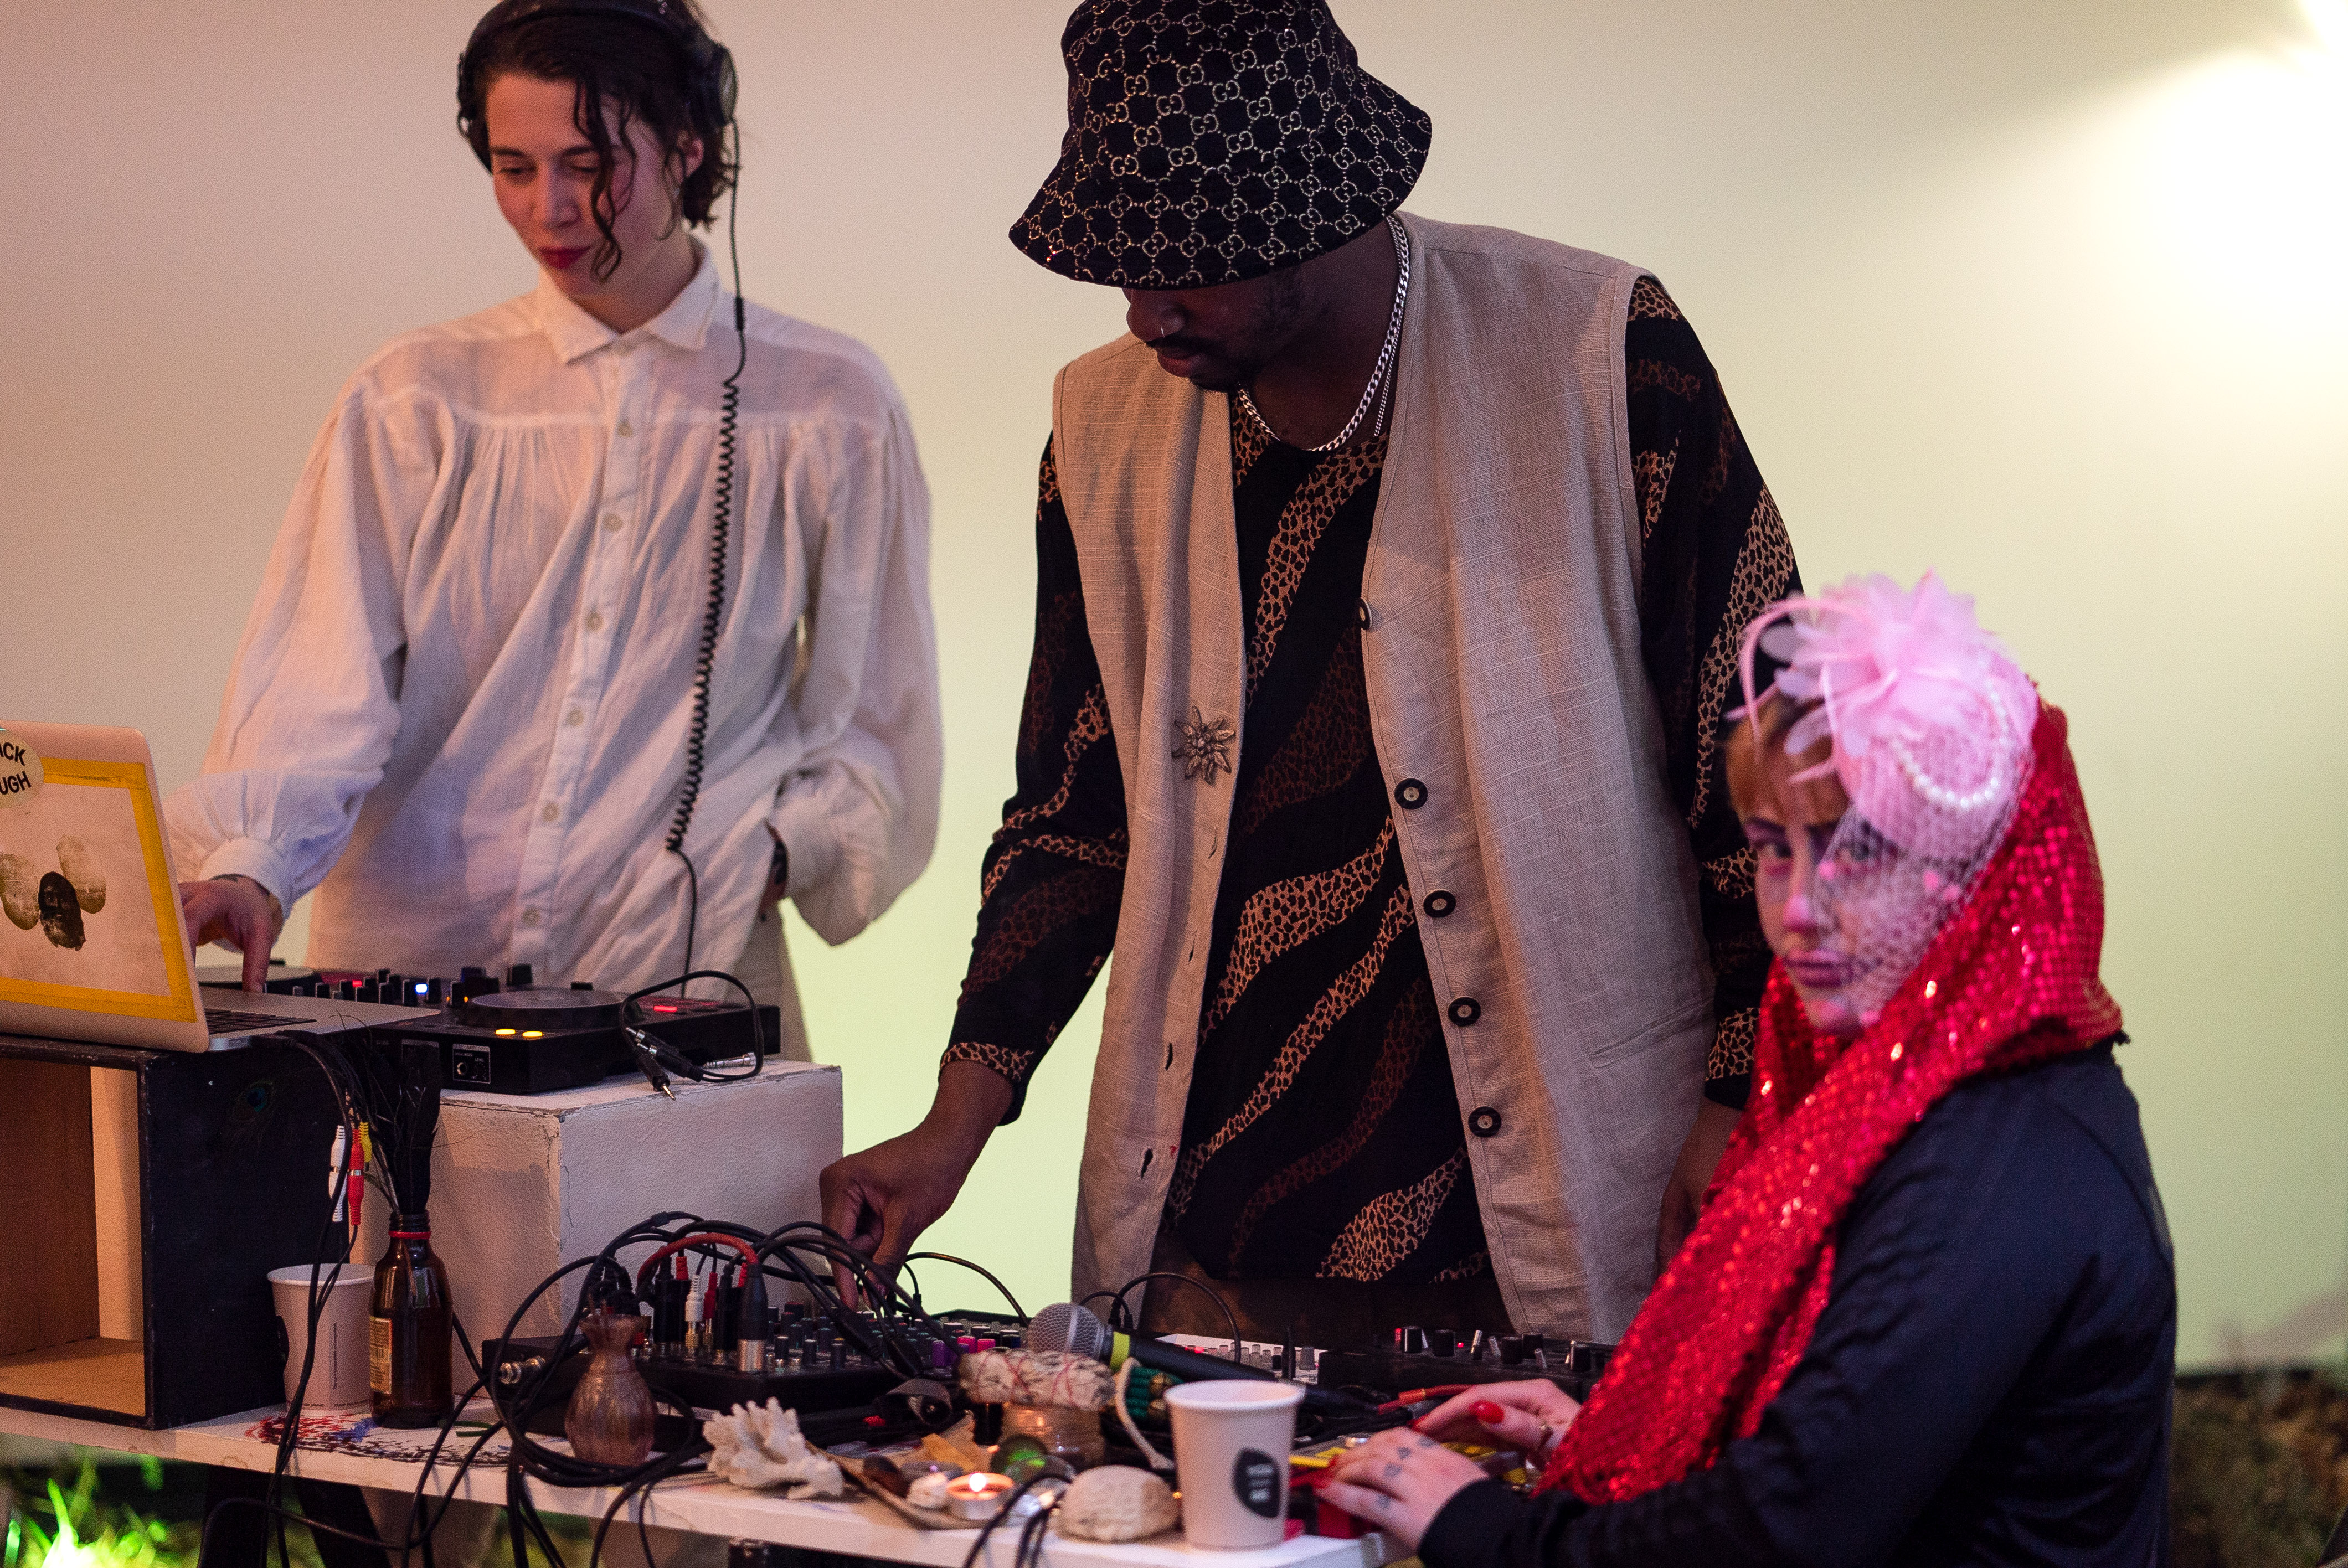 The photo is a medium shot of three people around a DJ table. The person on the far left is wearing white clothes, headphones and has one hand on a laptop. The person in the middle wears a hat, a traditional vest and operates DJ equipment. The person on the far right is the only one sitting at the table and looking towards the camera. She is wearing a large pink flower on her head and has a glittering red scarf wrapped around her neck.